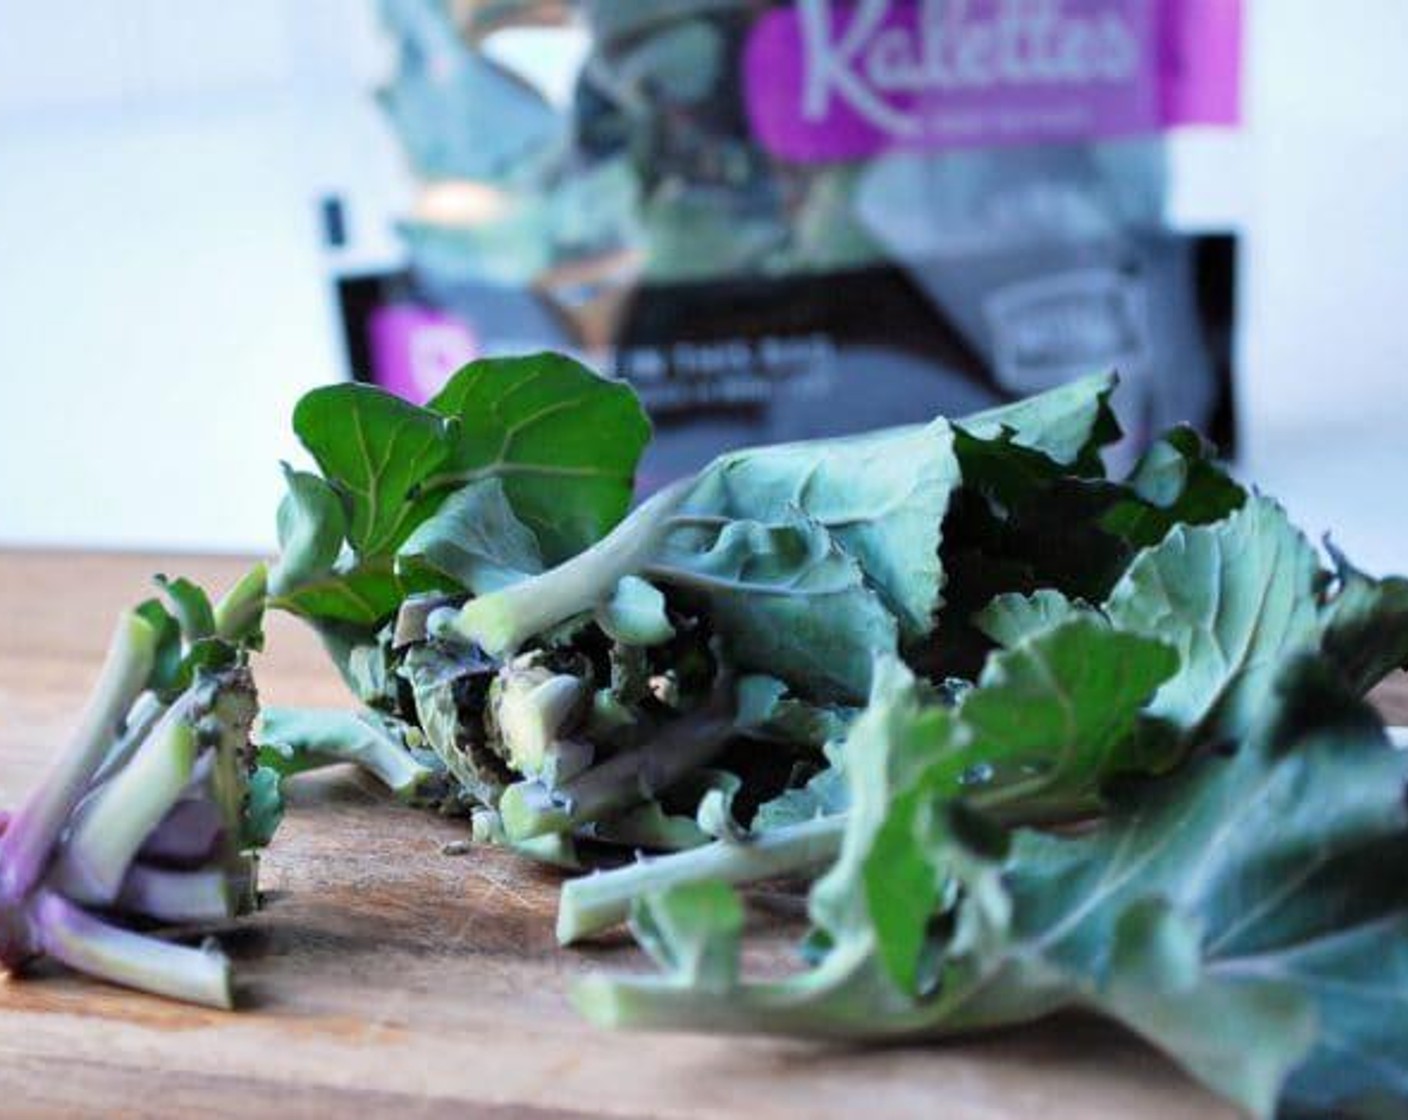 step 1 Cut the stem off the bottom of the Kalettes™ (6 cups) and place into a large bowl. Add Extra-Virgin Olive Oil (1/2 Tbsp) to the leaves and massage leaves to thoroughly coat. Sprinkle leaves with Coarse Salt (to taste) and set aside to sit for 10 minutes.